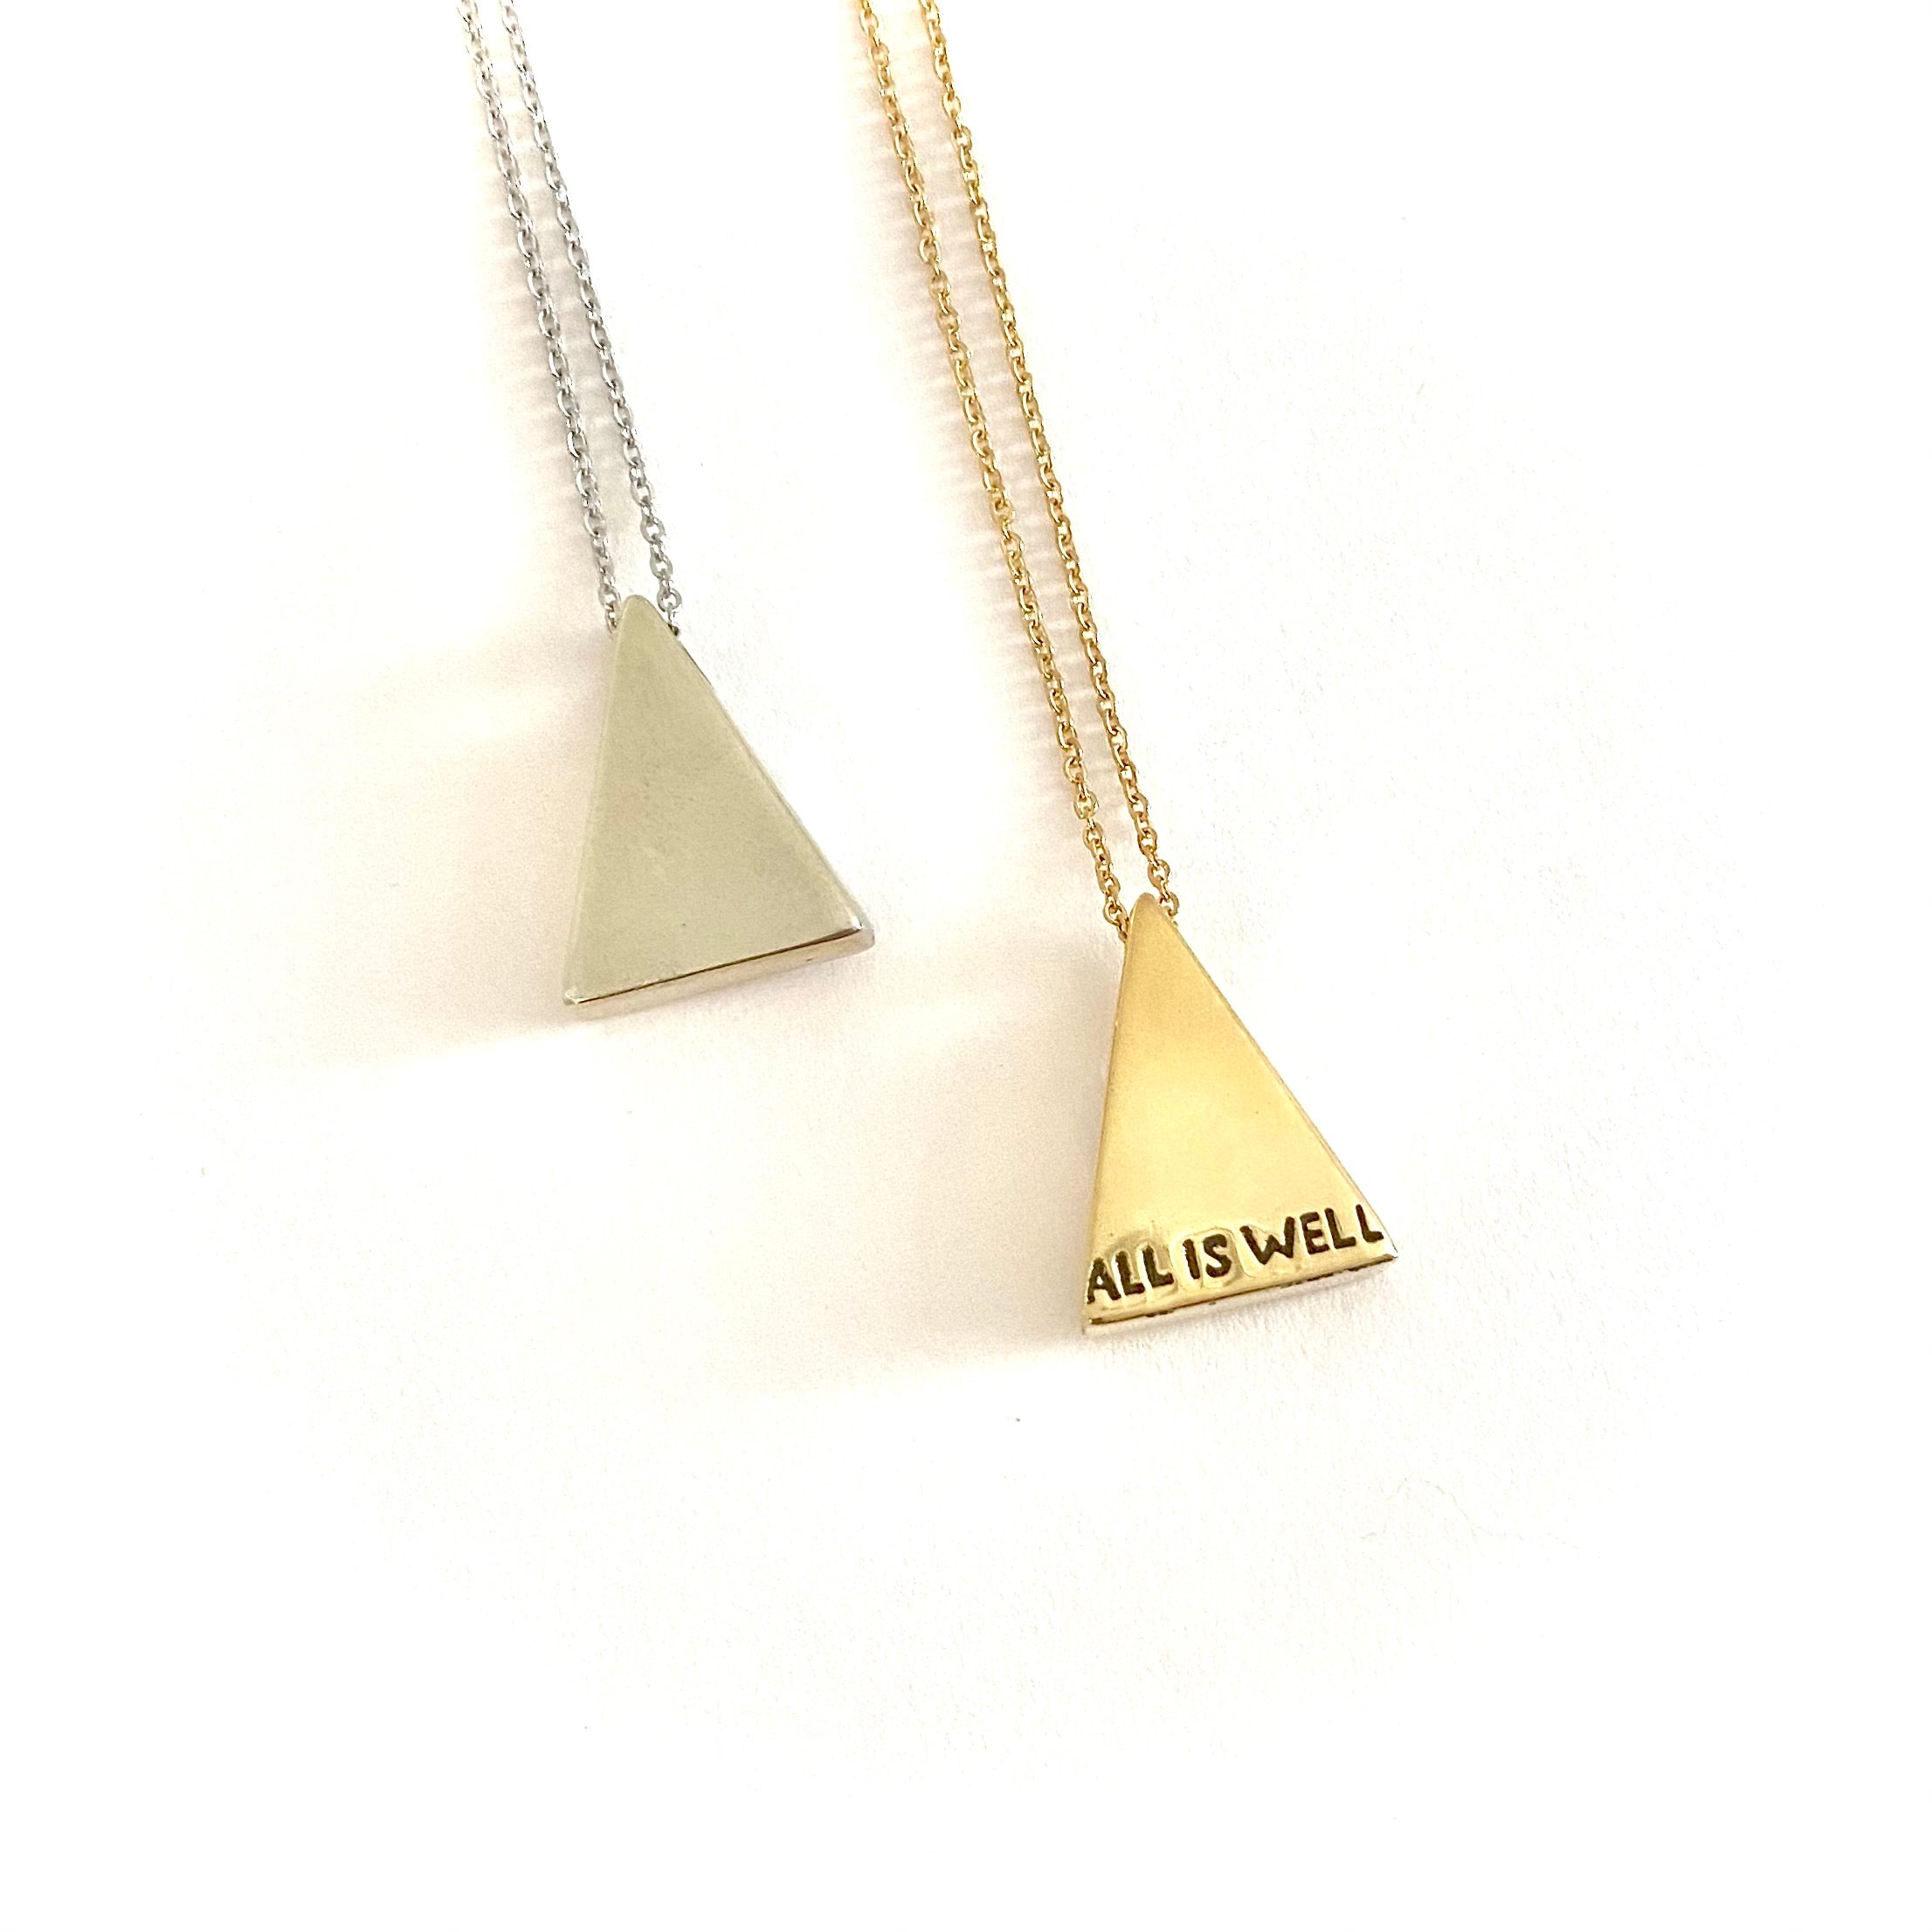 ALL IS WELL hand printed triangle pendant in silver or gold